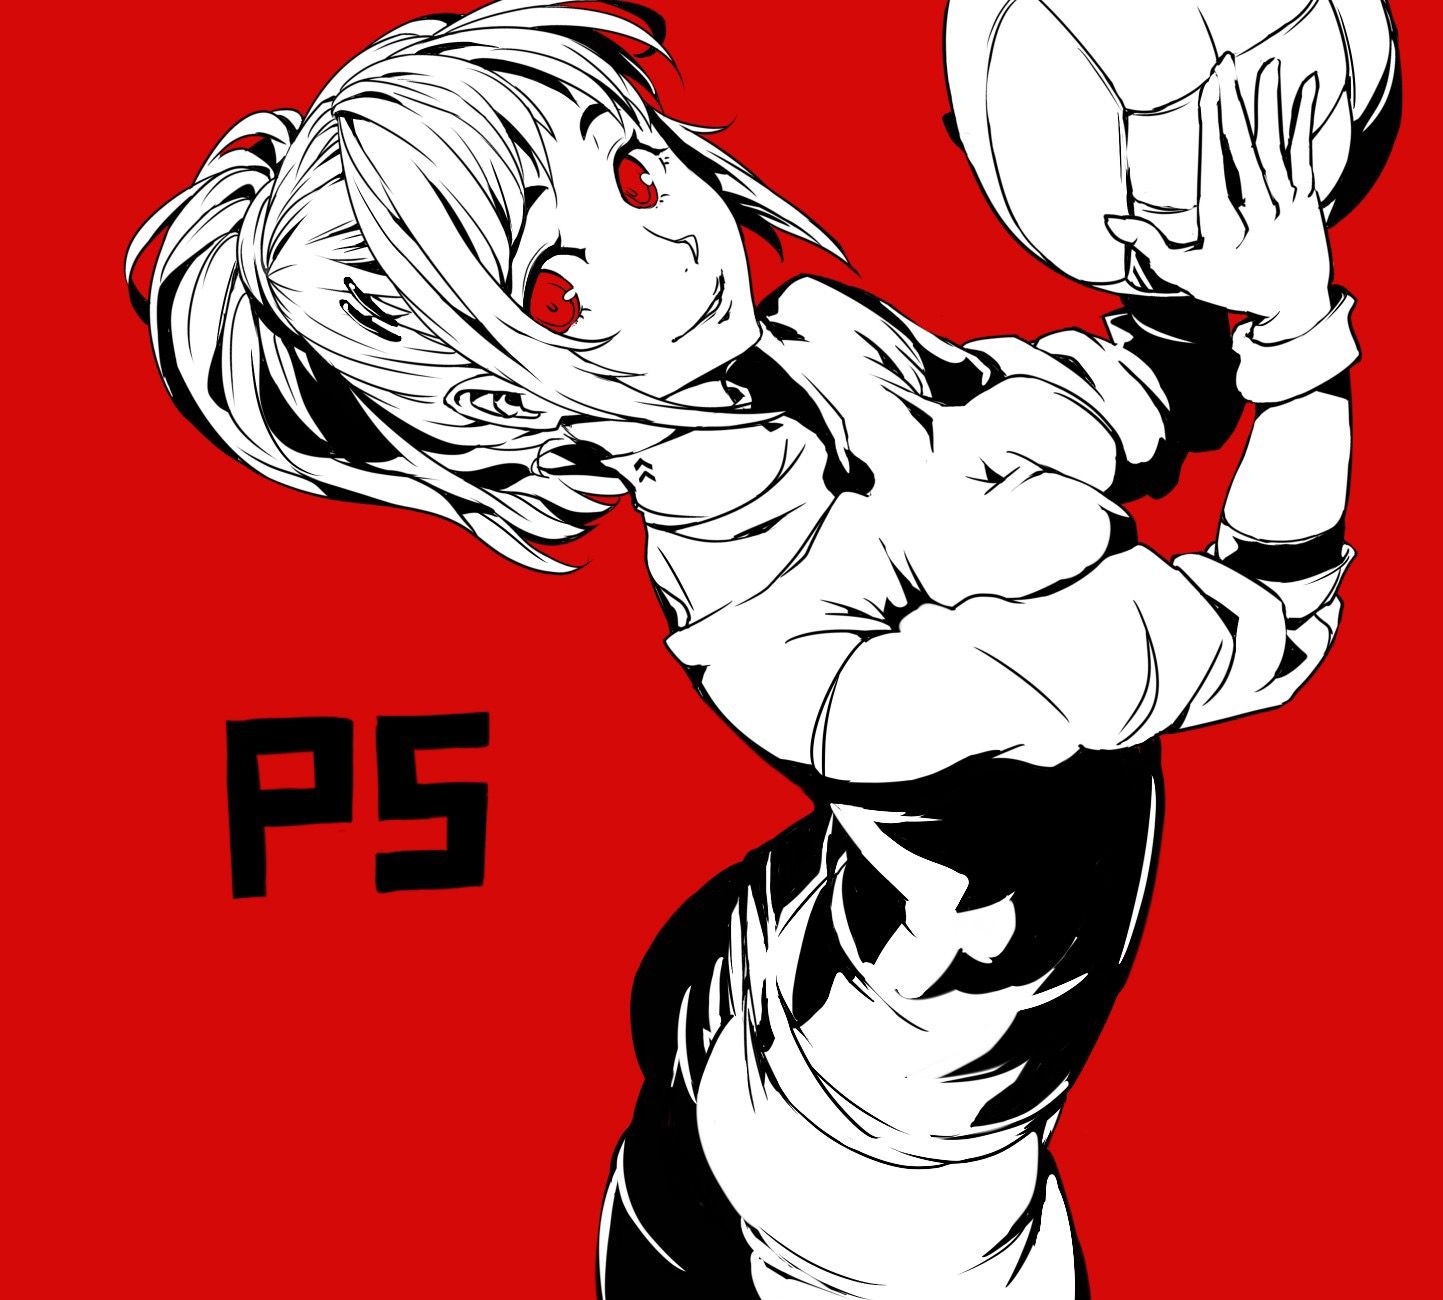 [Sad news] the fact that the first enemy of persona 5 is a physical education teacher who is going to rape a high school girl 3